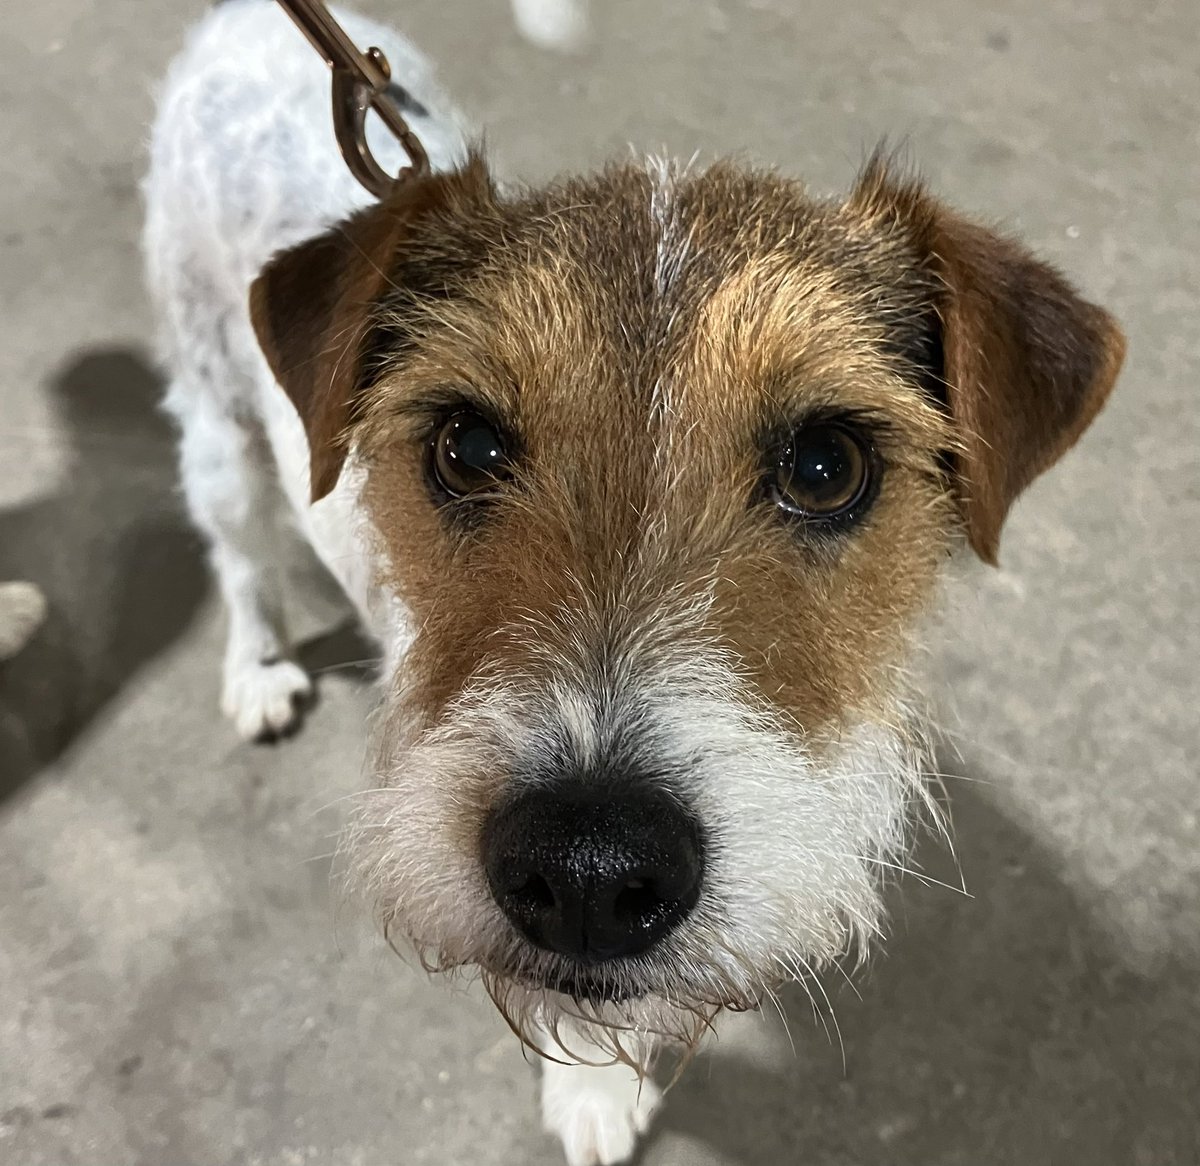 Dexter: “Mum’s proud of Alice & I cos we qualified for Crufts 24 1st time out this year. Dad (Stan) shone in the ring 👑 as did cousin Sonic 🌟They’re show offs cos they’re Crufts qualified for life. Lots of fun, cuddles & treats.” #DogsOnTwitter #dog #dogs #parsonrussellterrier